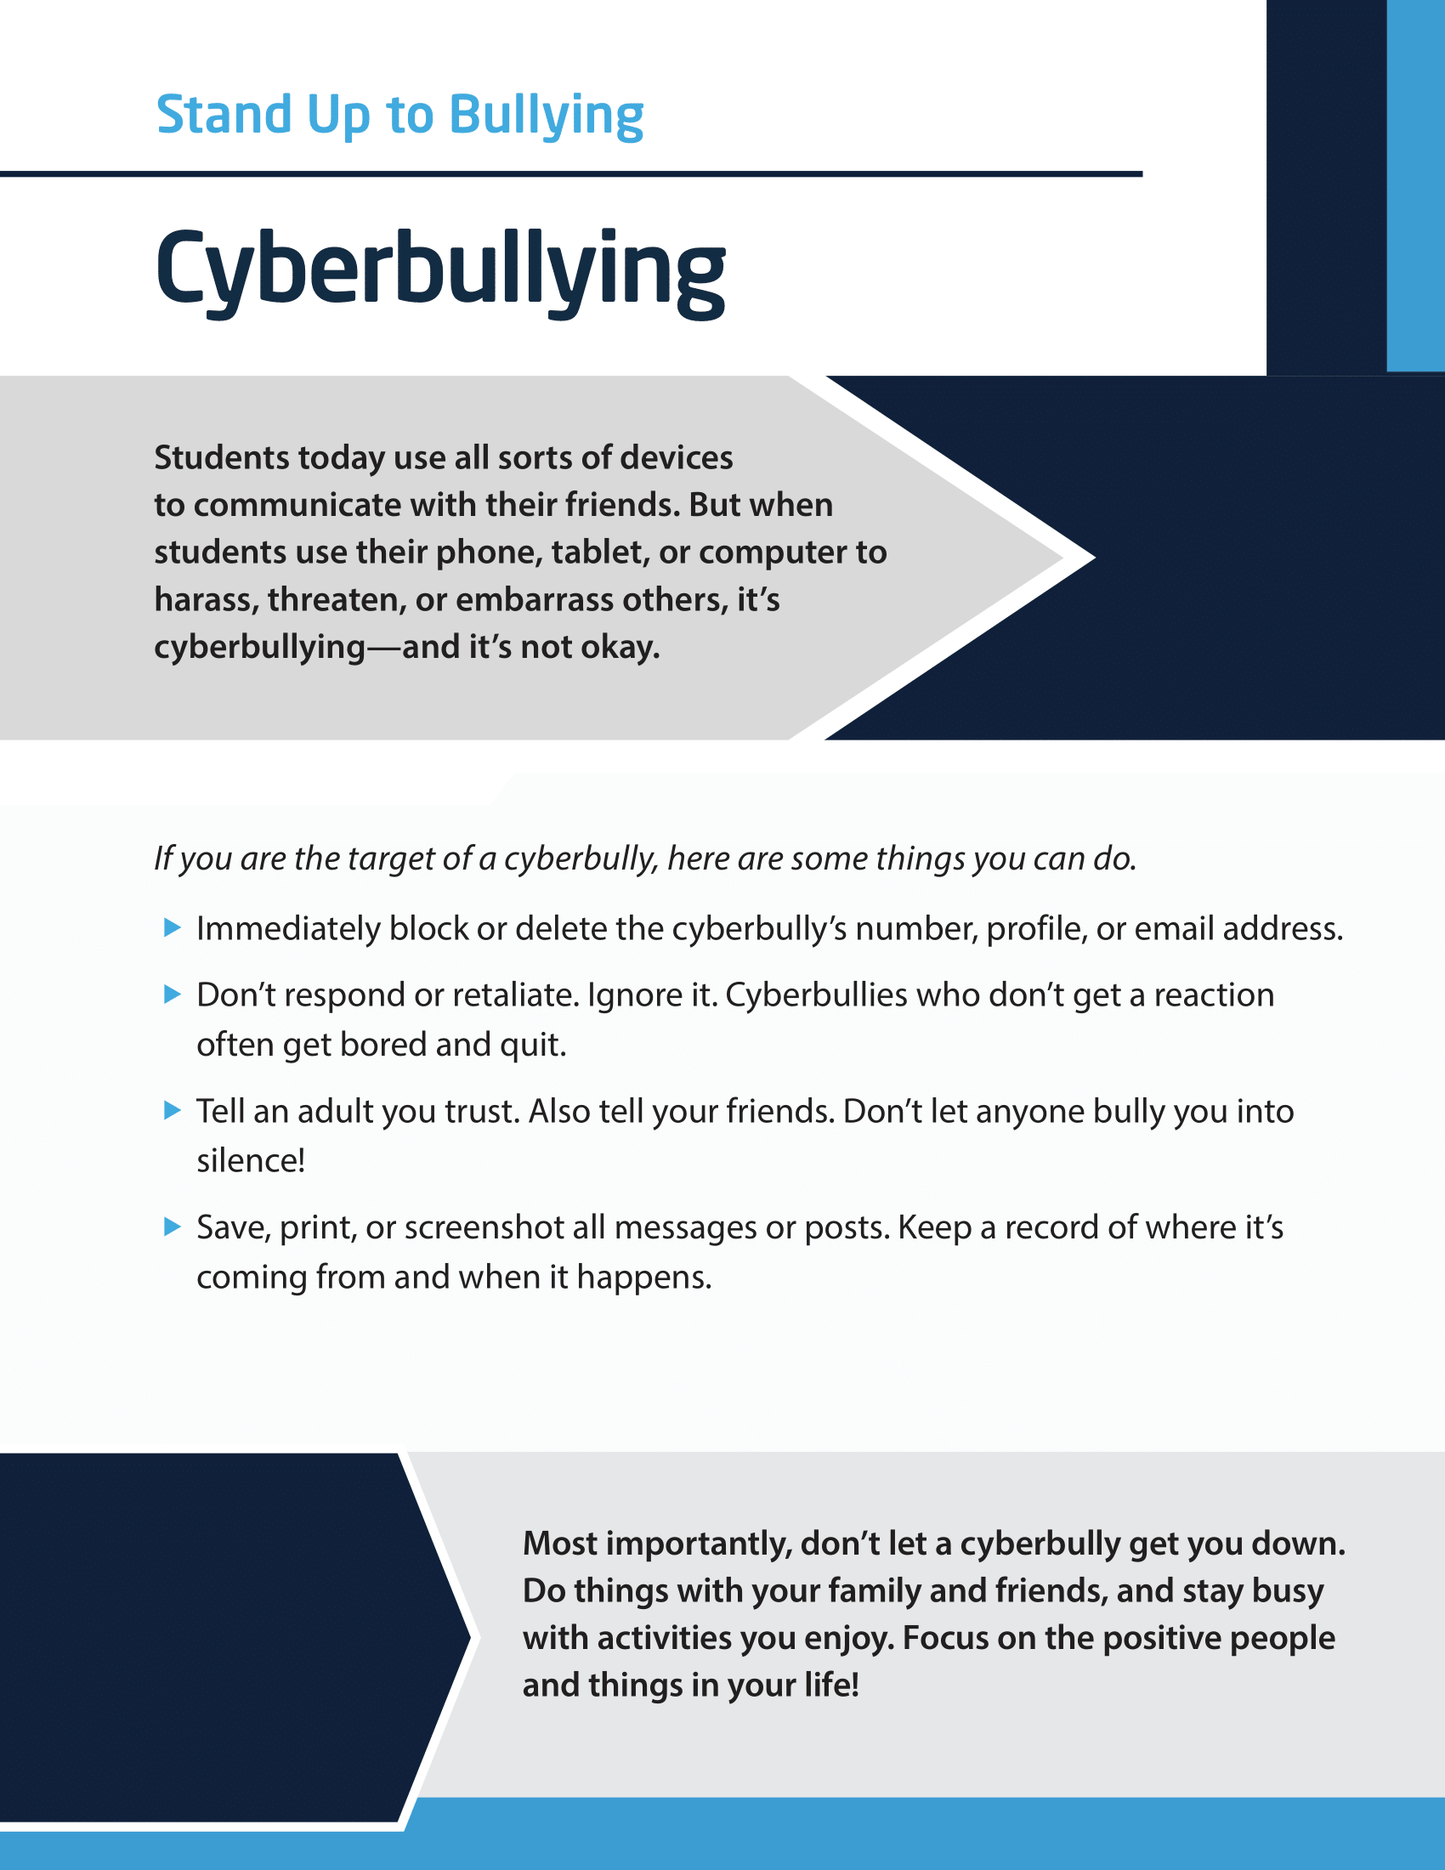 Stand Up to Bullying - Cyberbullying